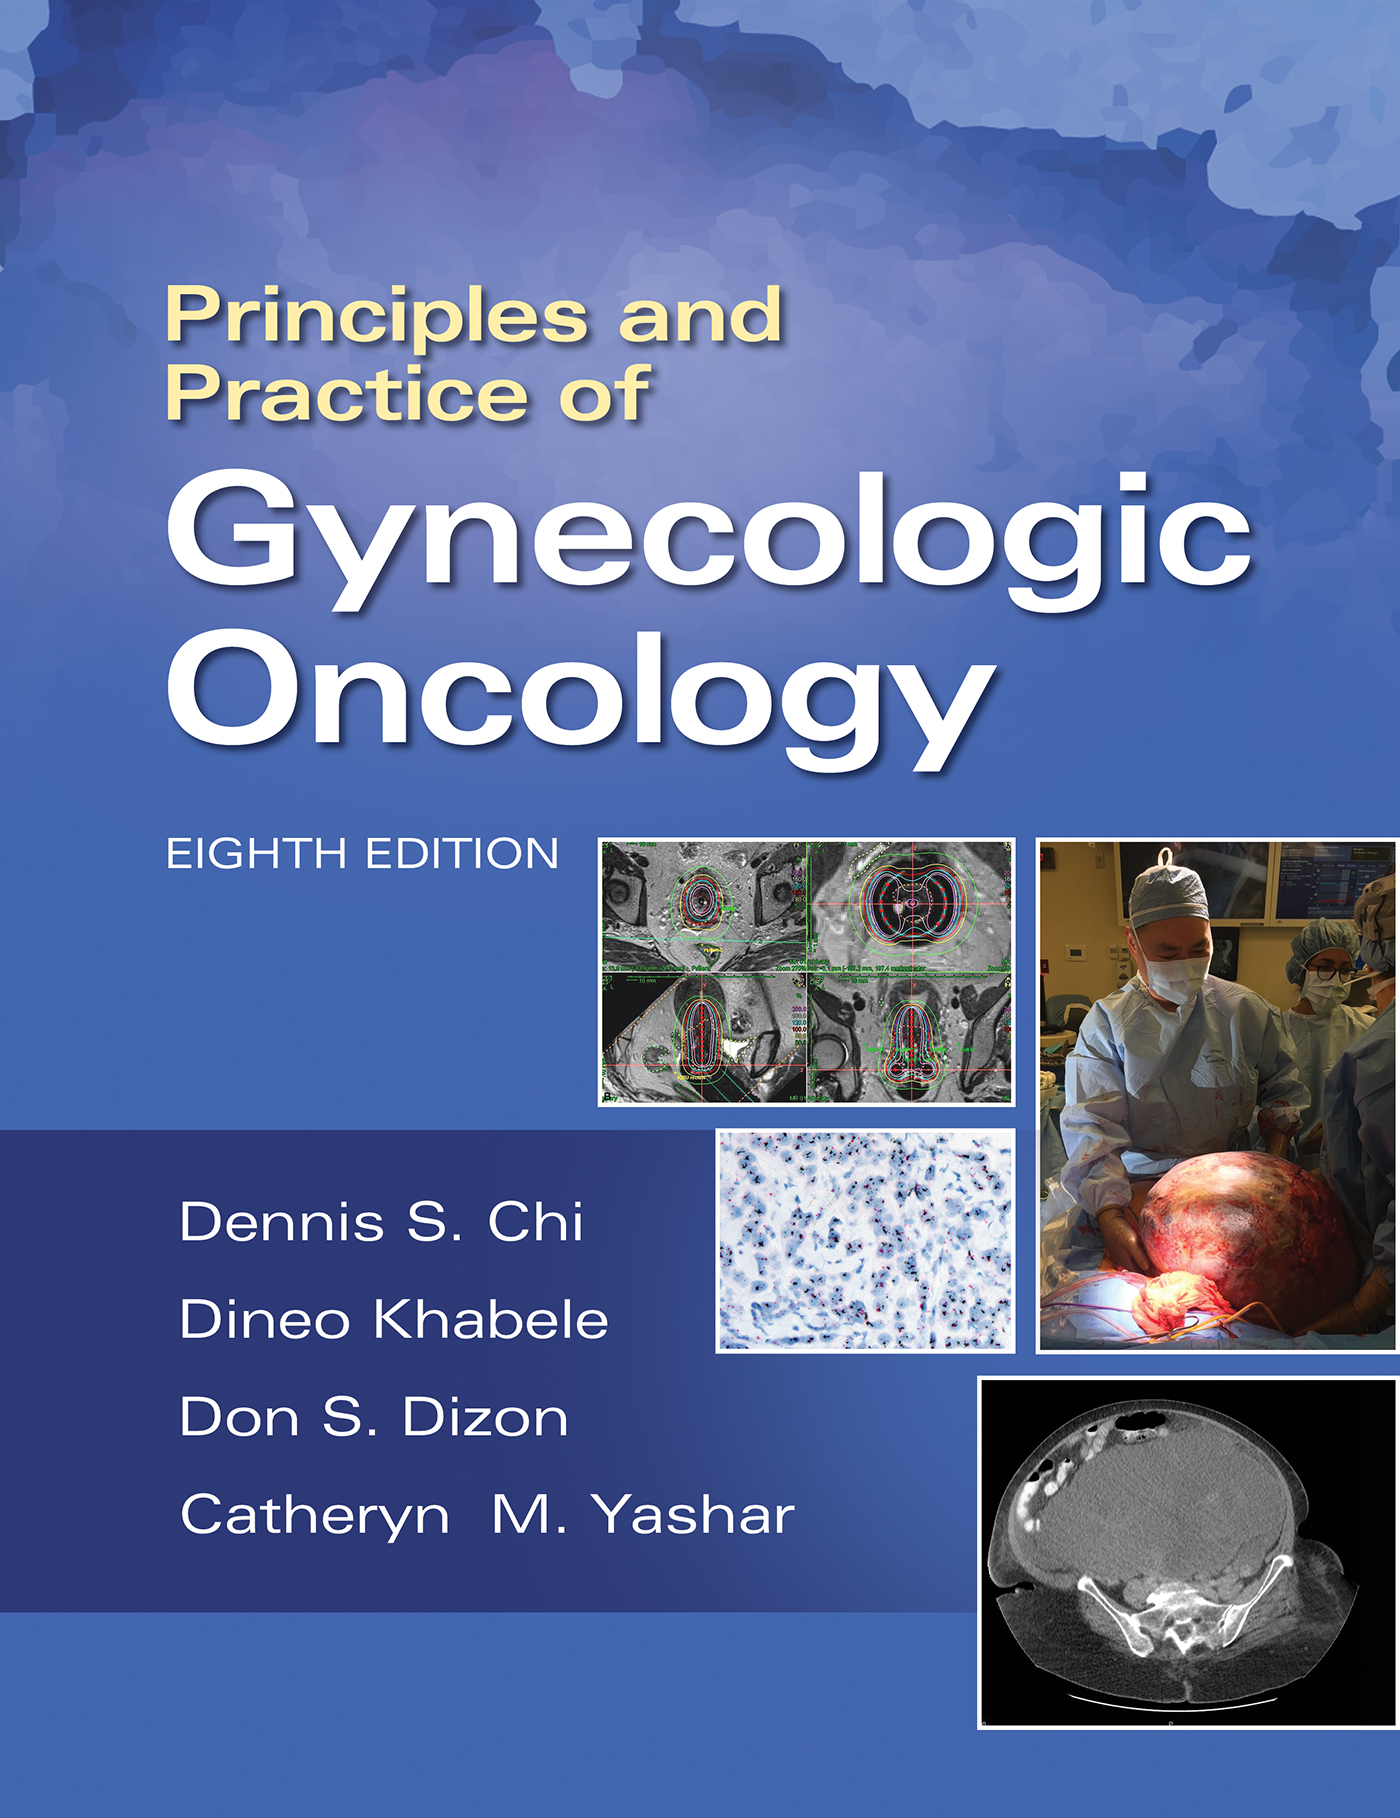 Principles & Practice of Gynecologic Oncology, 8th ed.